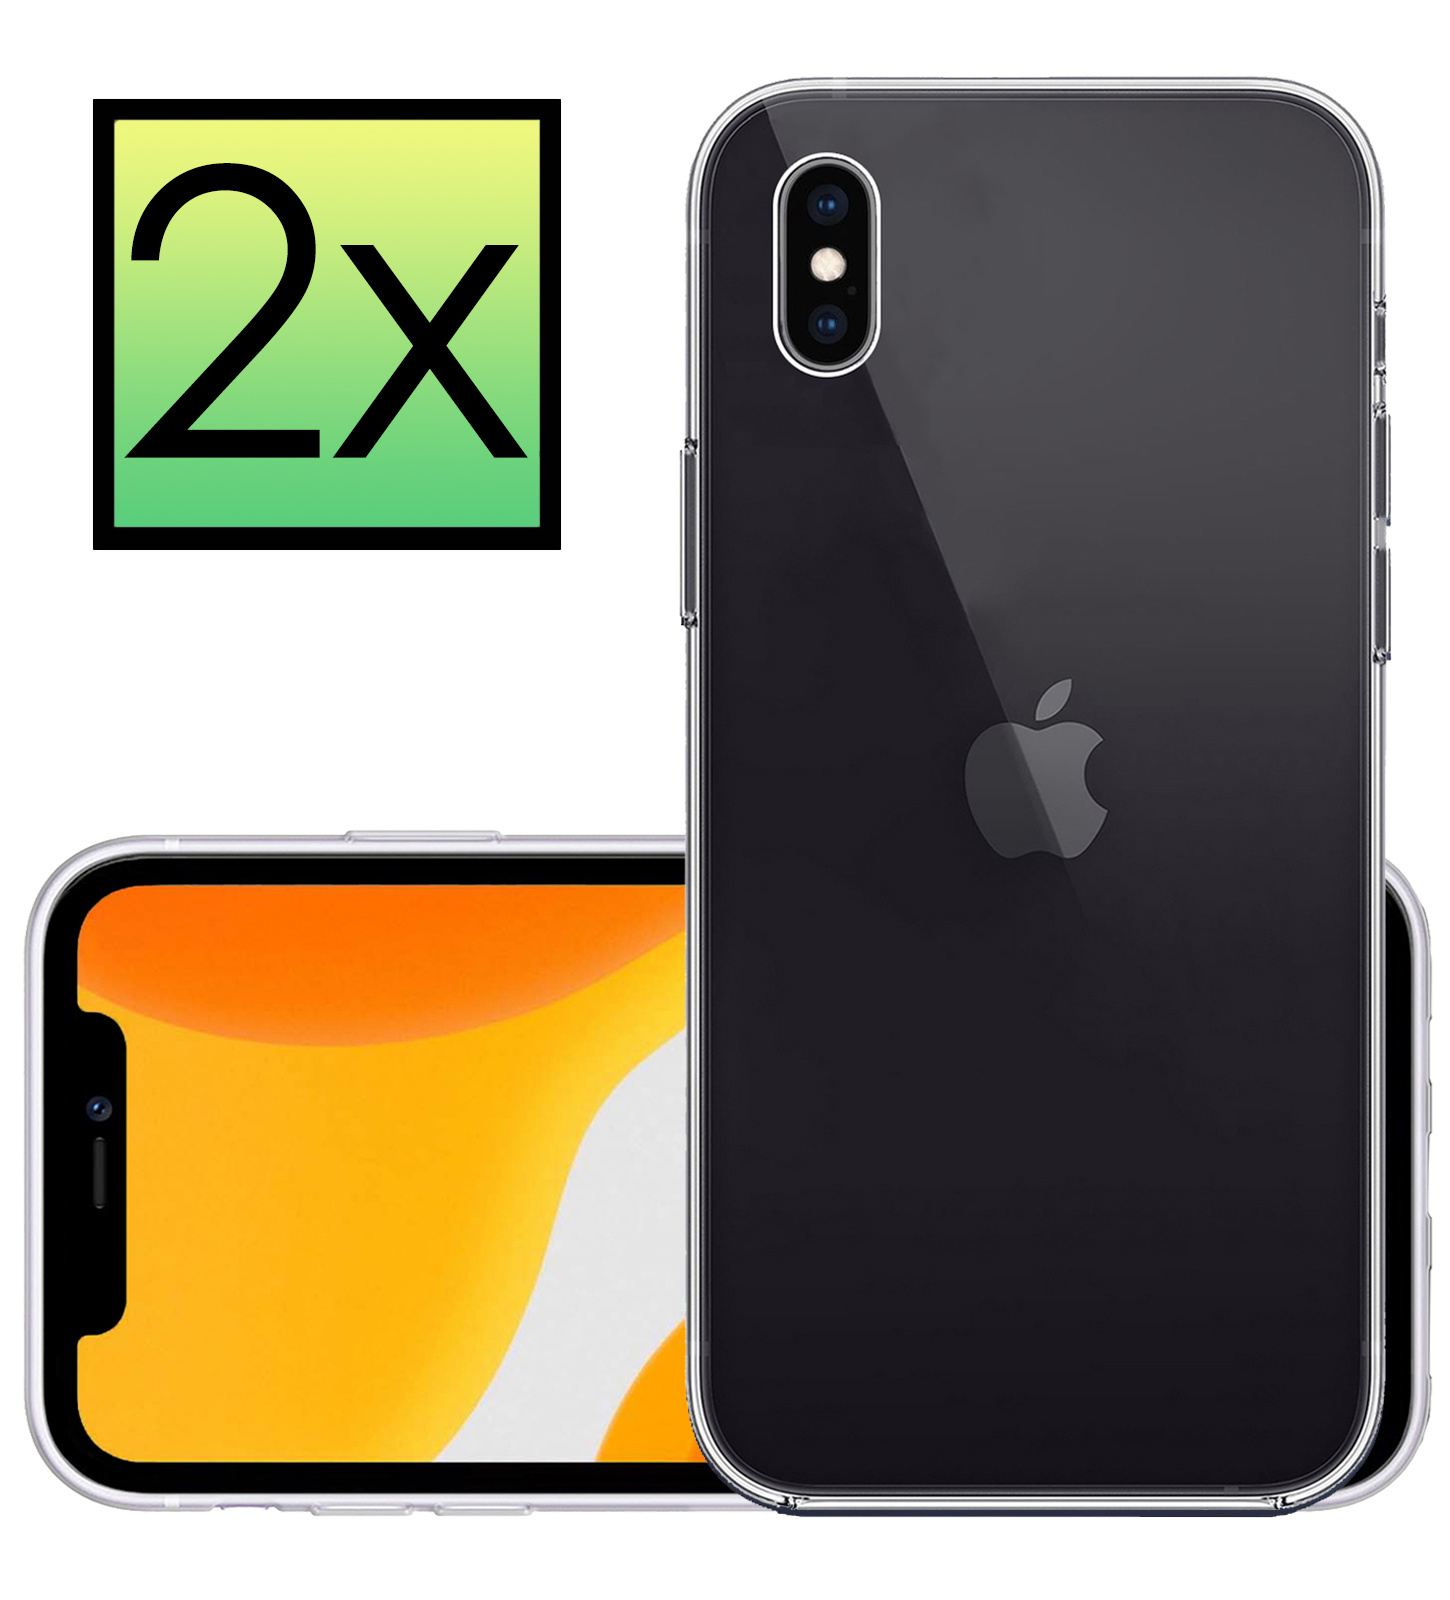 NoXx Hoes voor iPhone Xs Max Hoesje Back Cover Siliconen Case Hoes - Transparant - 2x